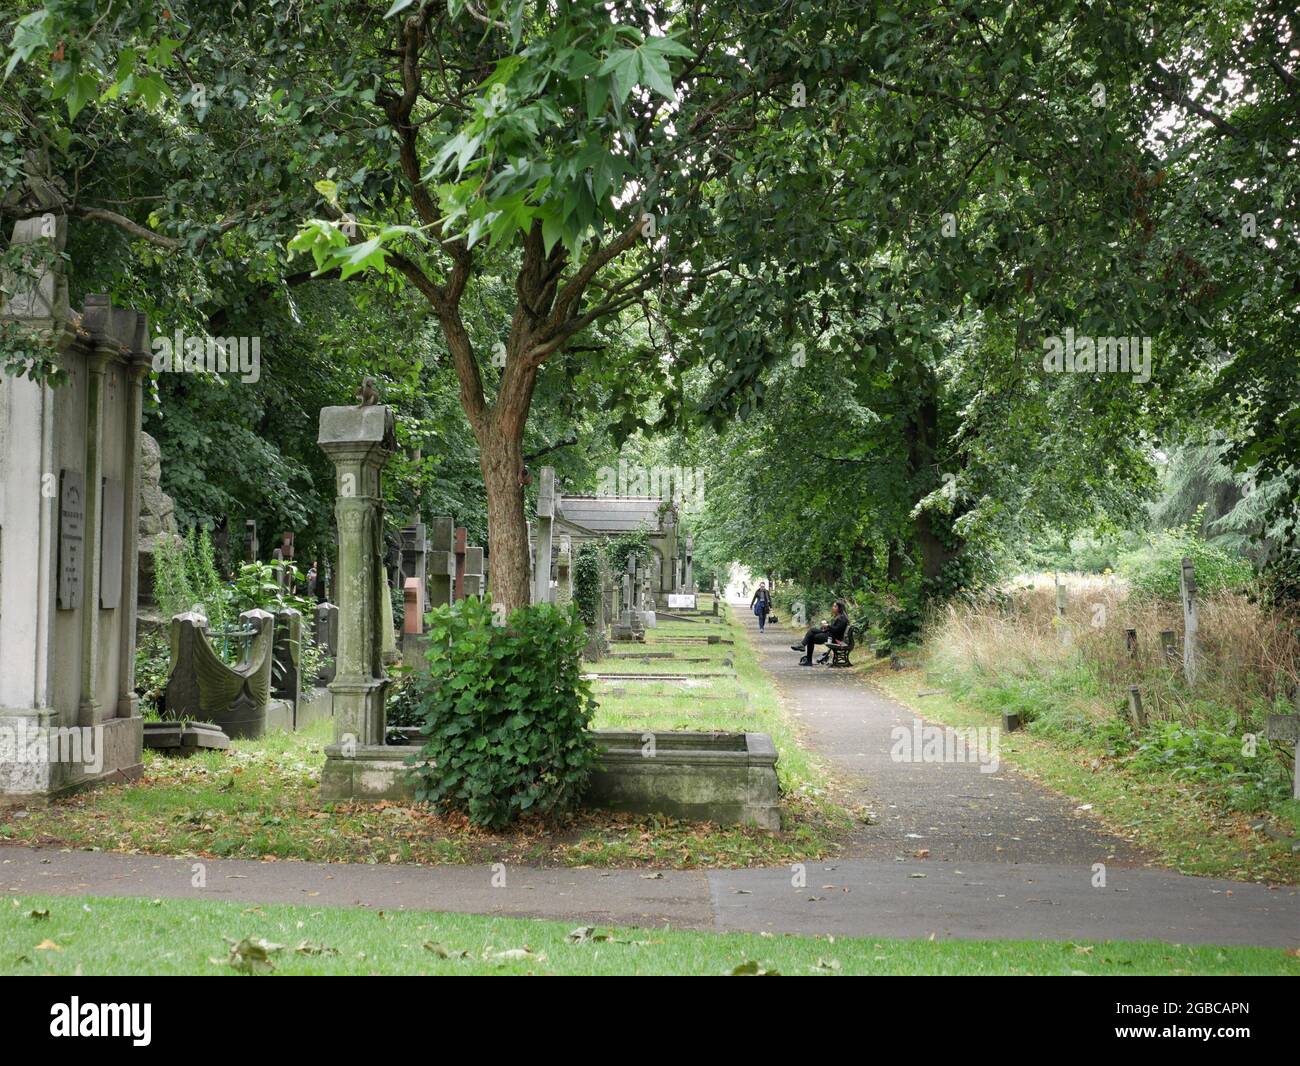 One of the many pathways through Brompton Cemetery for an enjoyable peaceful walk. Stock Photo